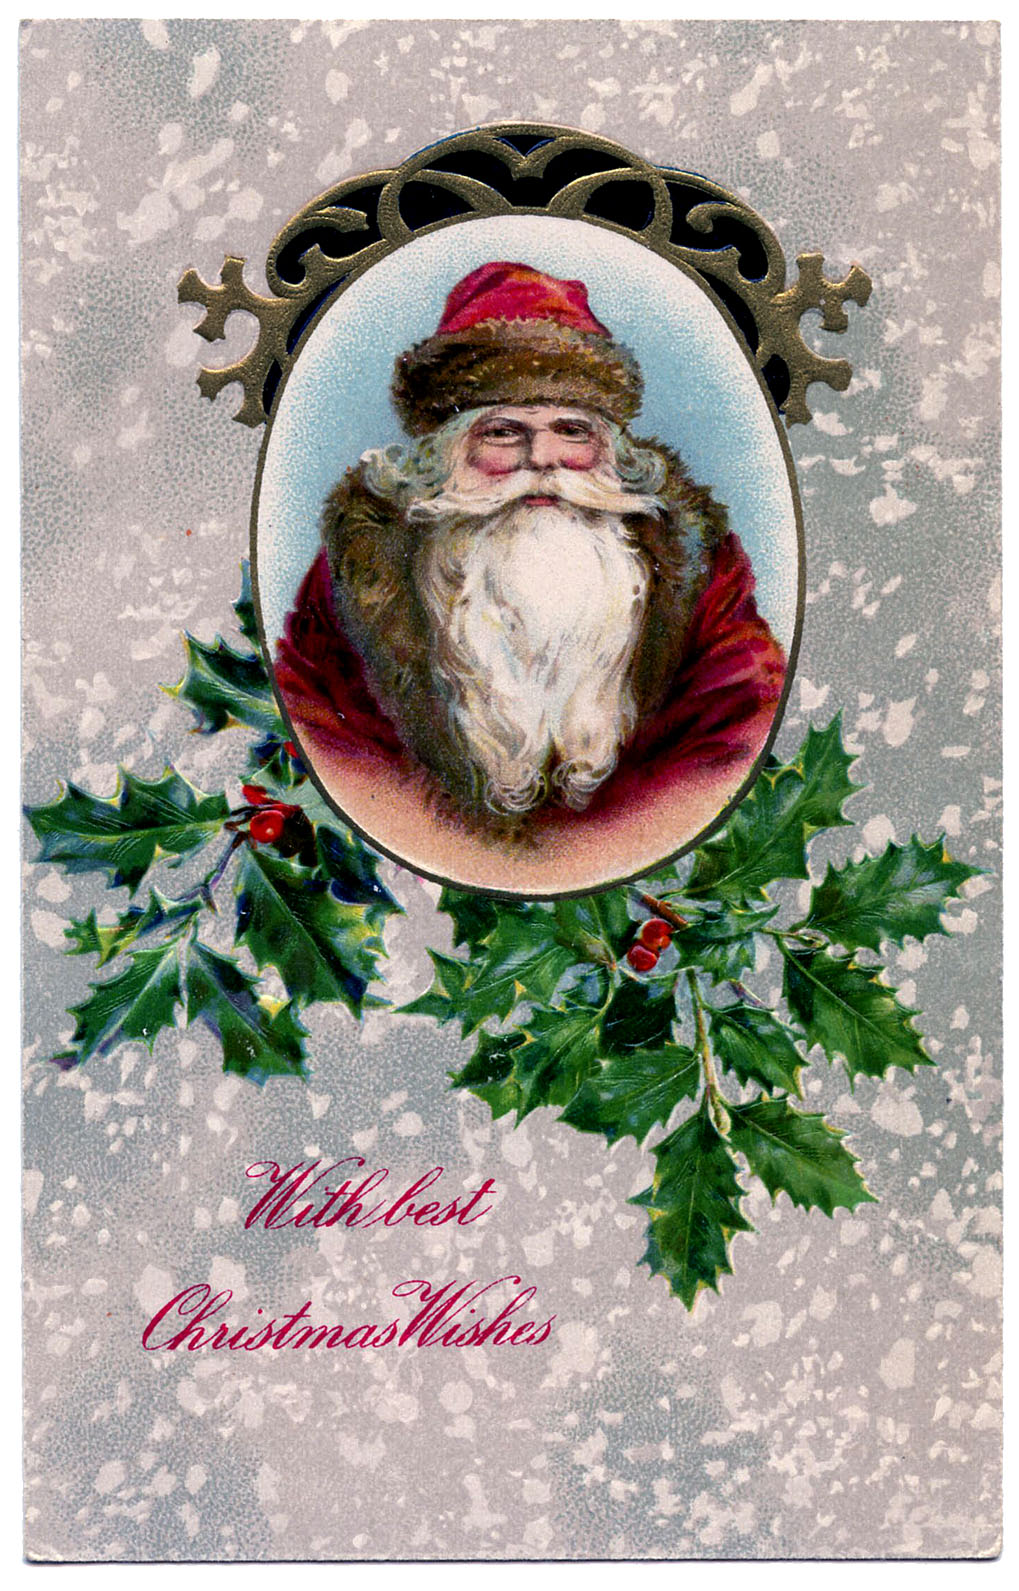 Vintage Christmas Graphic - Santa with Holly - The Graphics Fairy